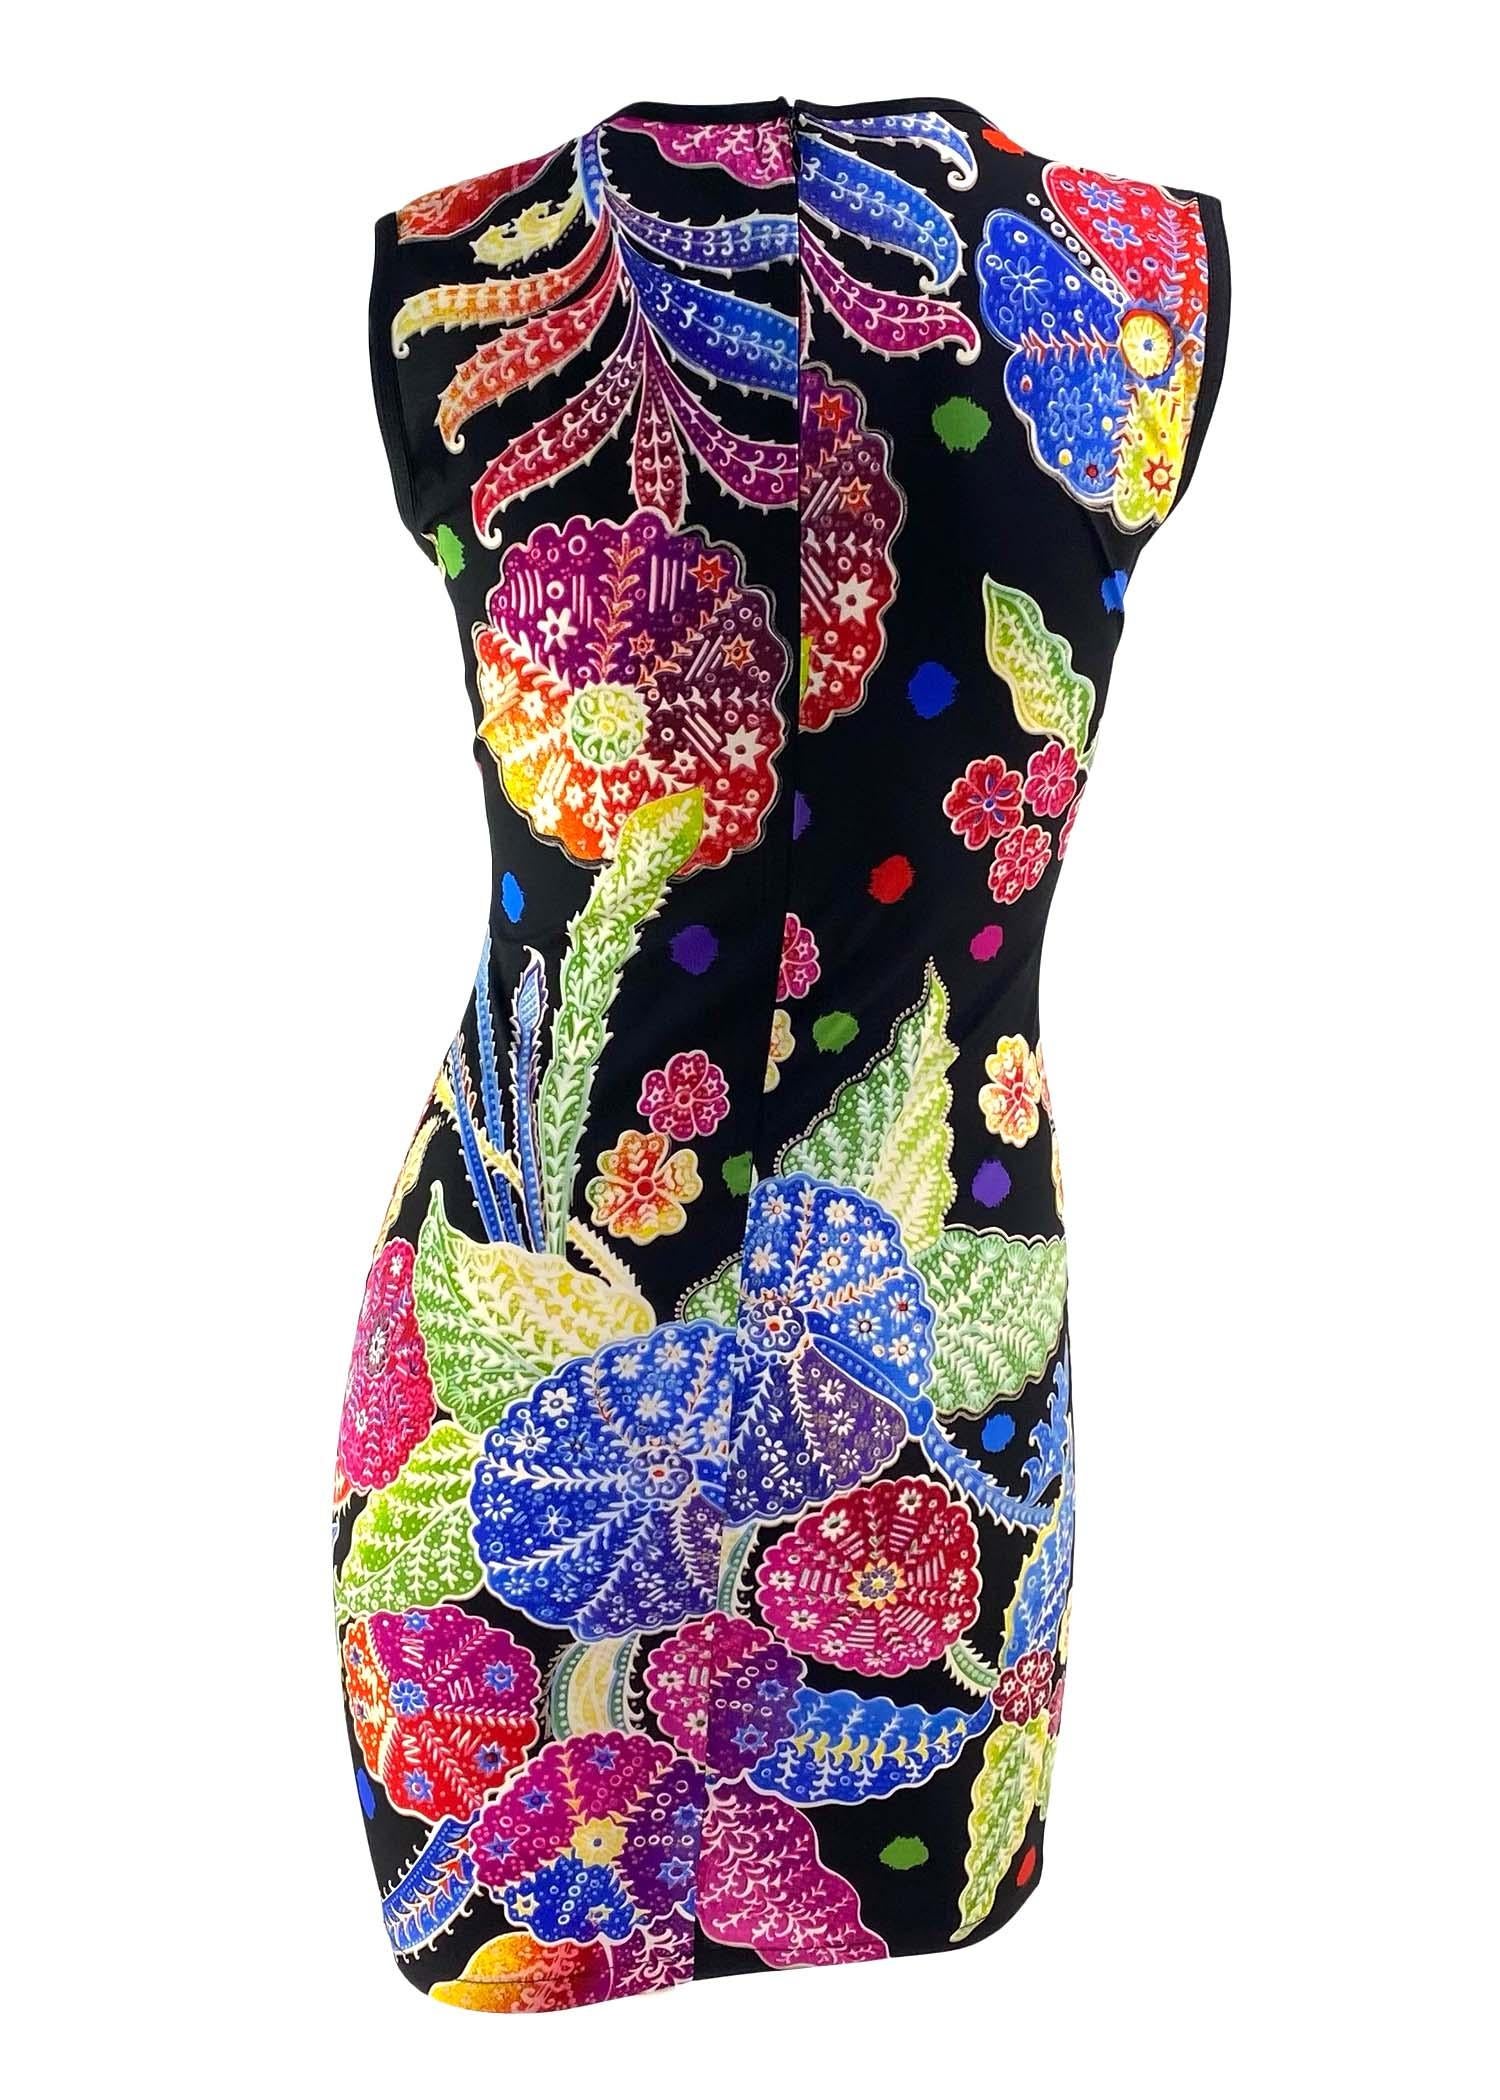 F/W 1993 Gianni Versace Couture Black Multicolor Floral Stretch Sleeveless Dress 5